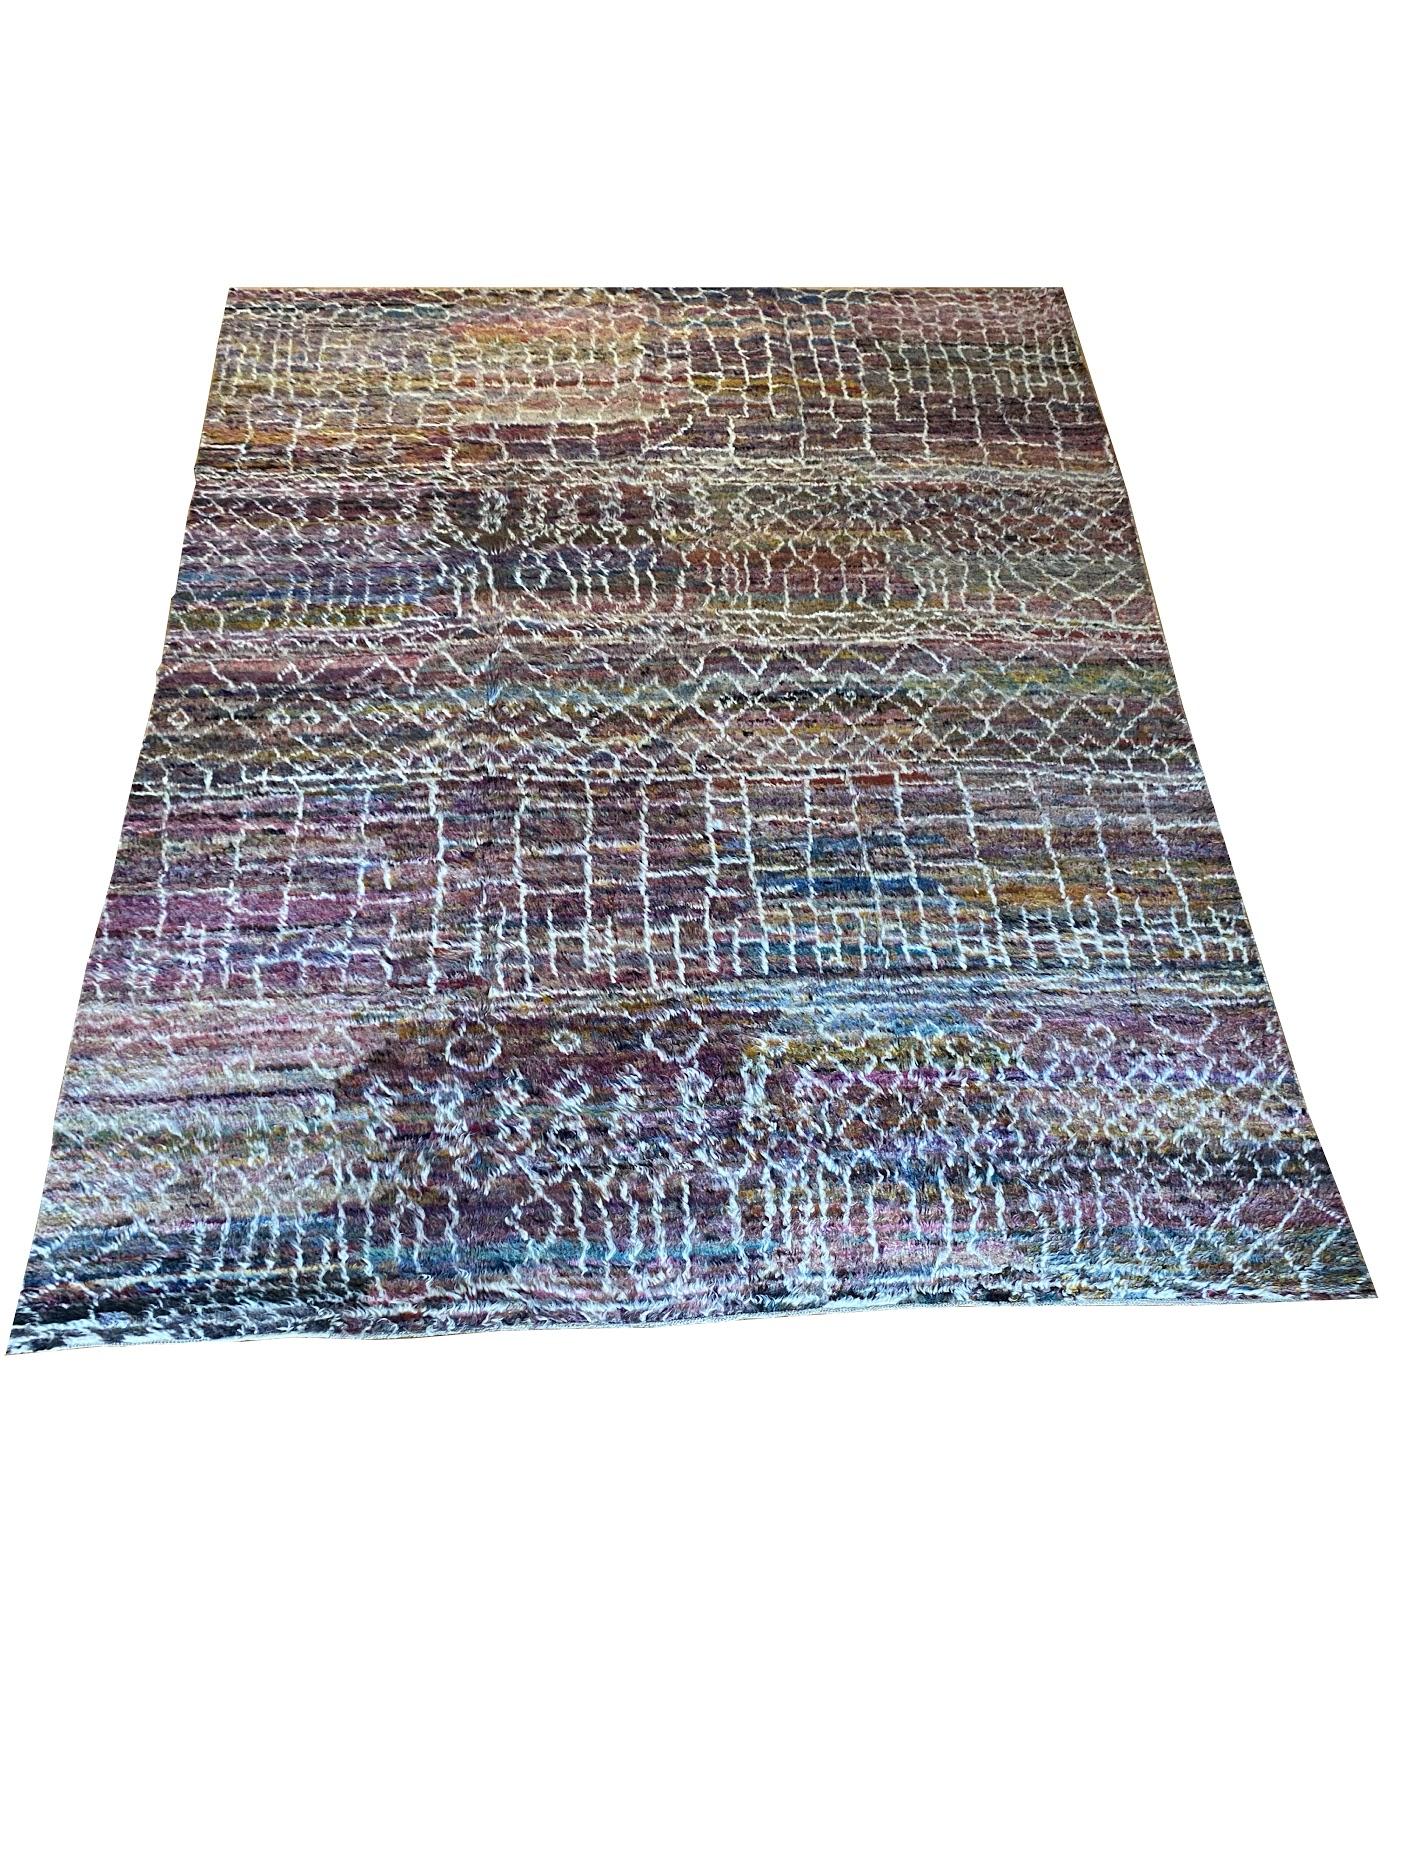 Jewel toned plush shaggy Moroccan rug with lattice, zig zag, and linear patterns.

9′ x 11’9″

 

14686

 

The early adoption of rug-making by native Moroccans is certainly due in large part to the distinctive climate of the region: Moroccan rugs